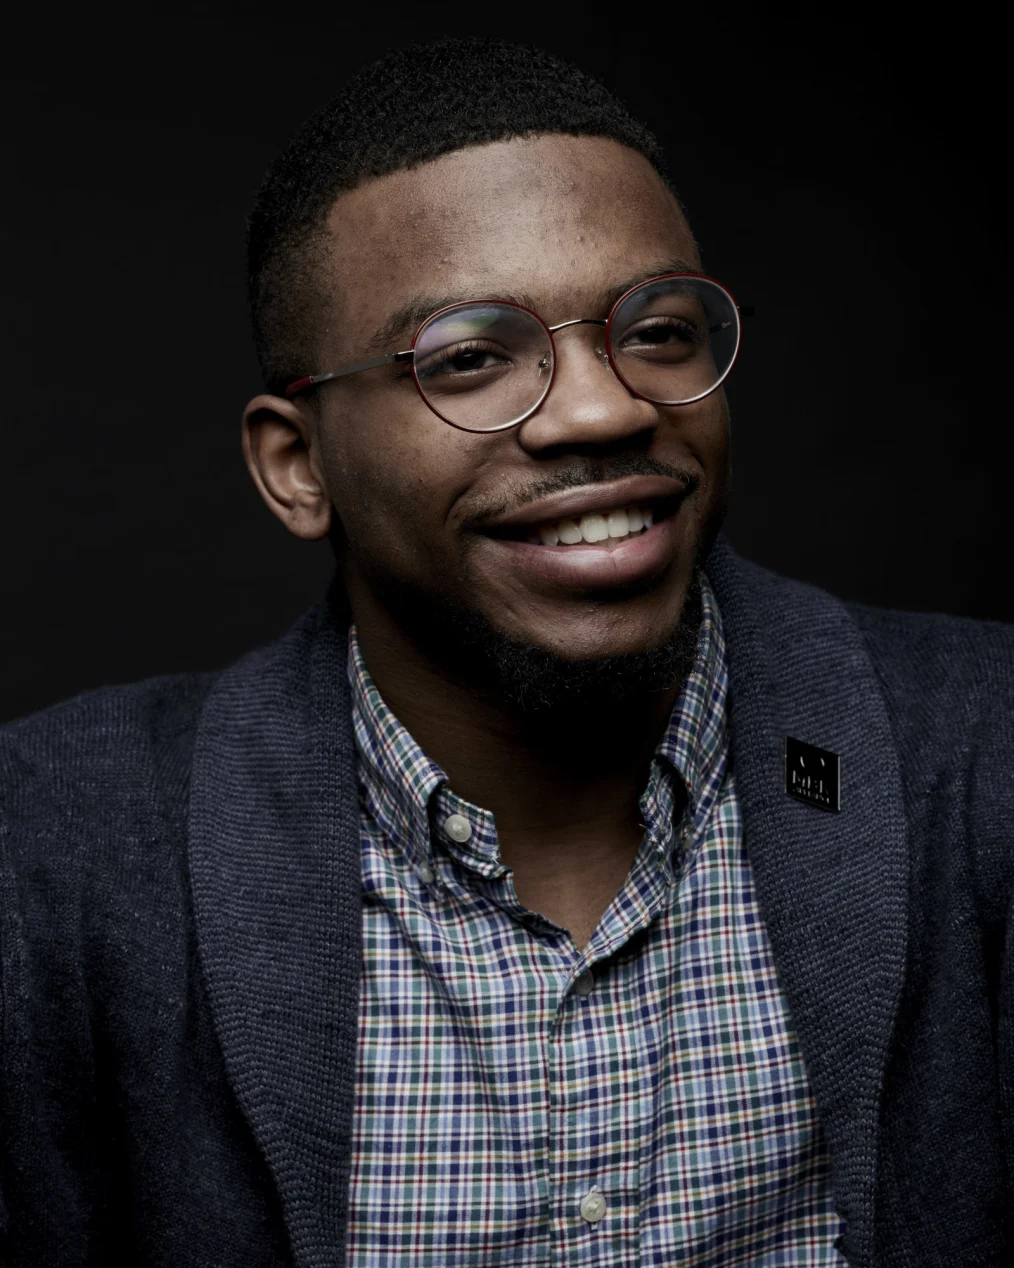 A Black man with short hair and glasses smiles slightly as he looks to the right. He wears a plaid button-down shirt and dark jacket. The background is black and the lighting is soft on his face.